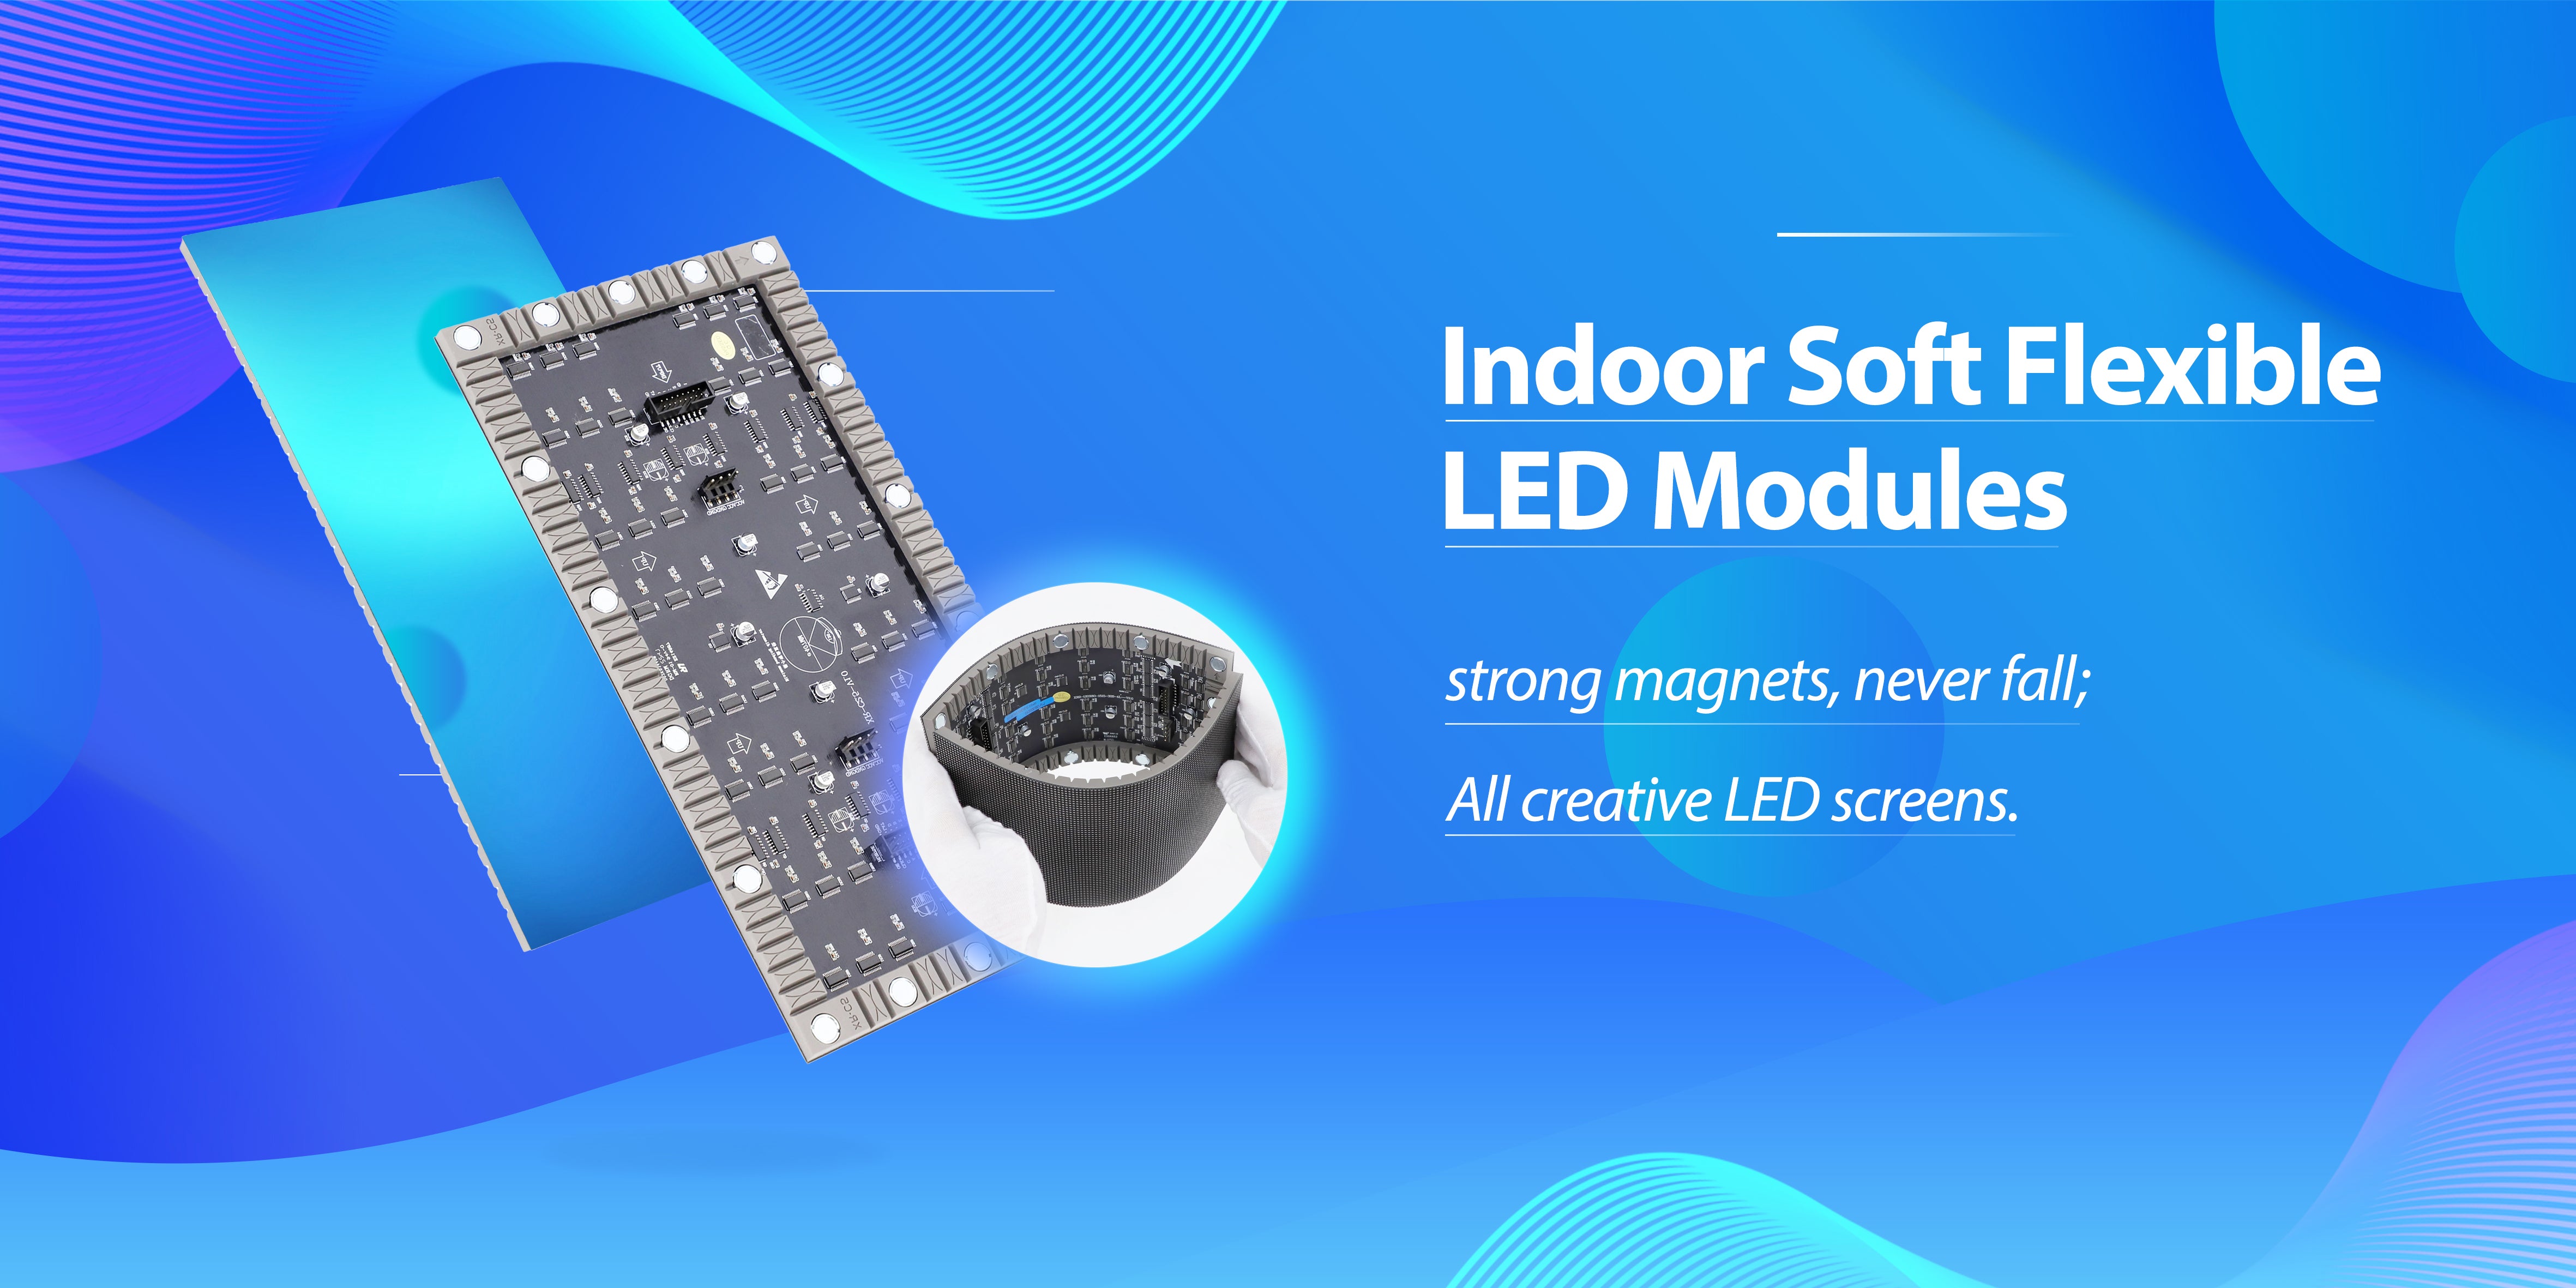 LED Display Module, LED Screen Controller and LED Video Processor